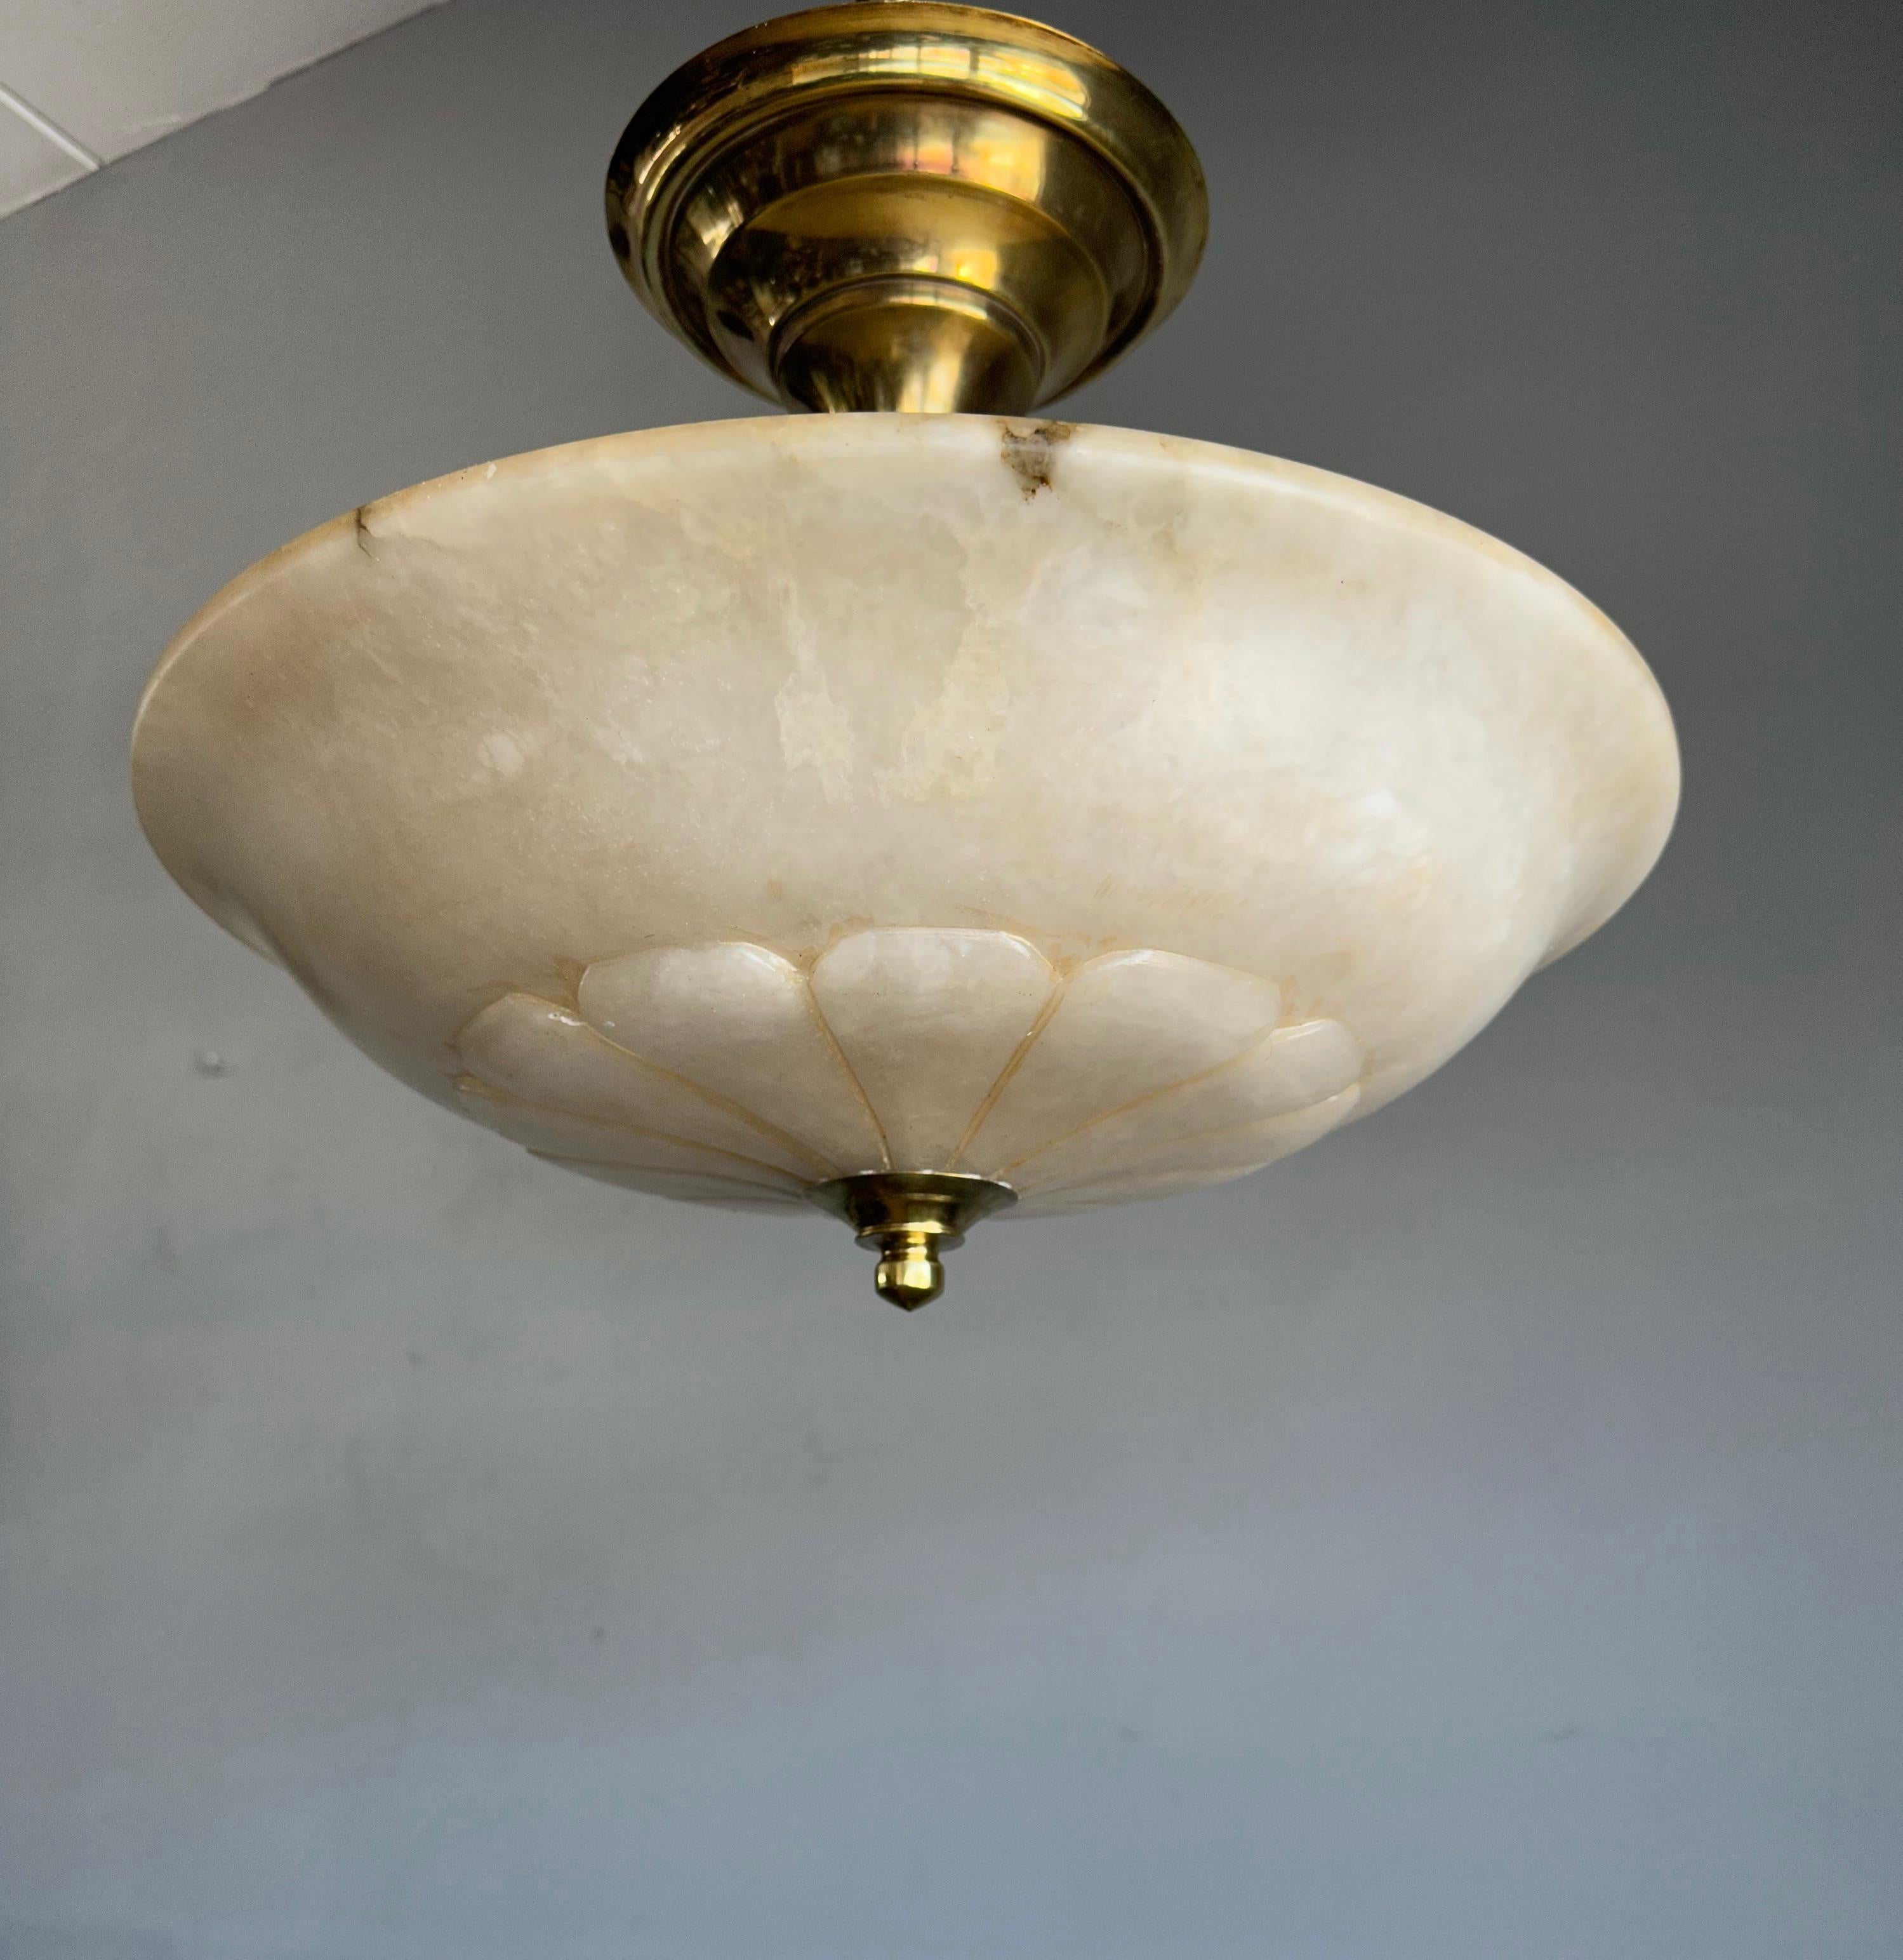 Rare and majestic, three light alabaster pendant.

This large size flush mount comes with a stunning design and perfectly polished alabaster shade. This beautifully balanced alabaster light fixture is designed in such a way that the three bulbs